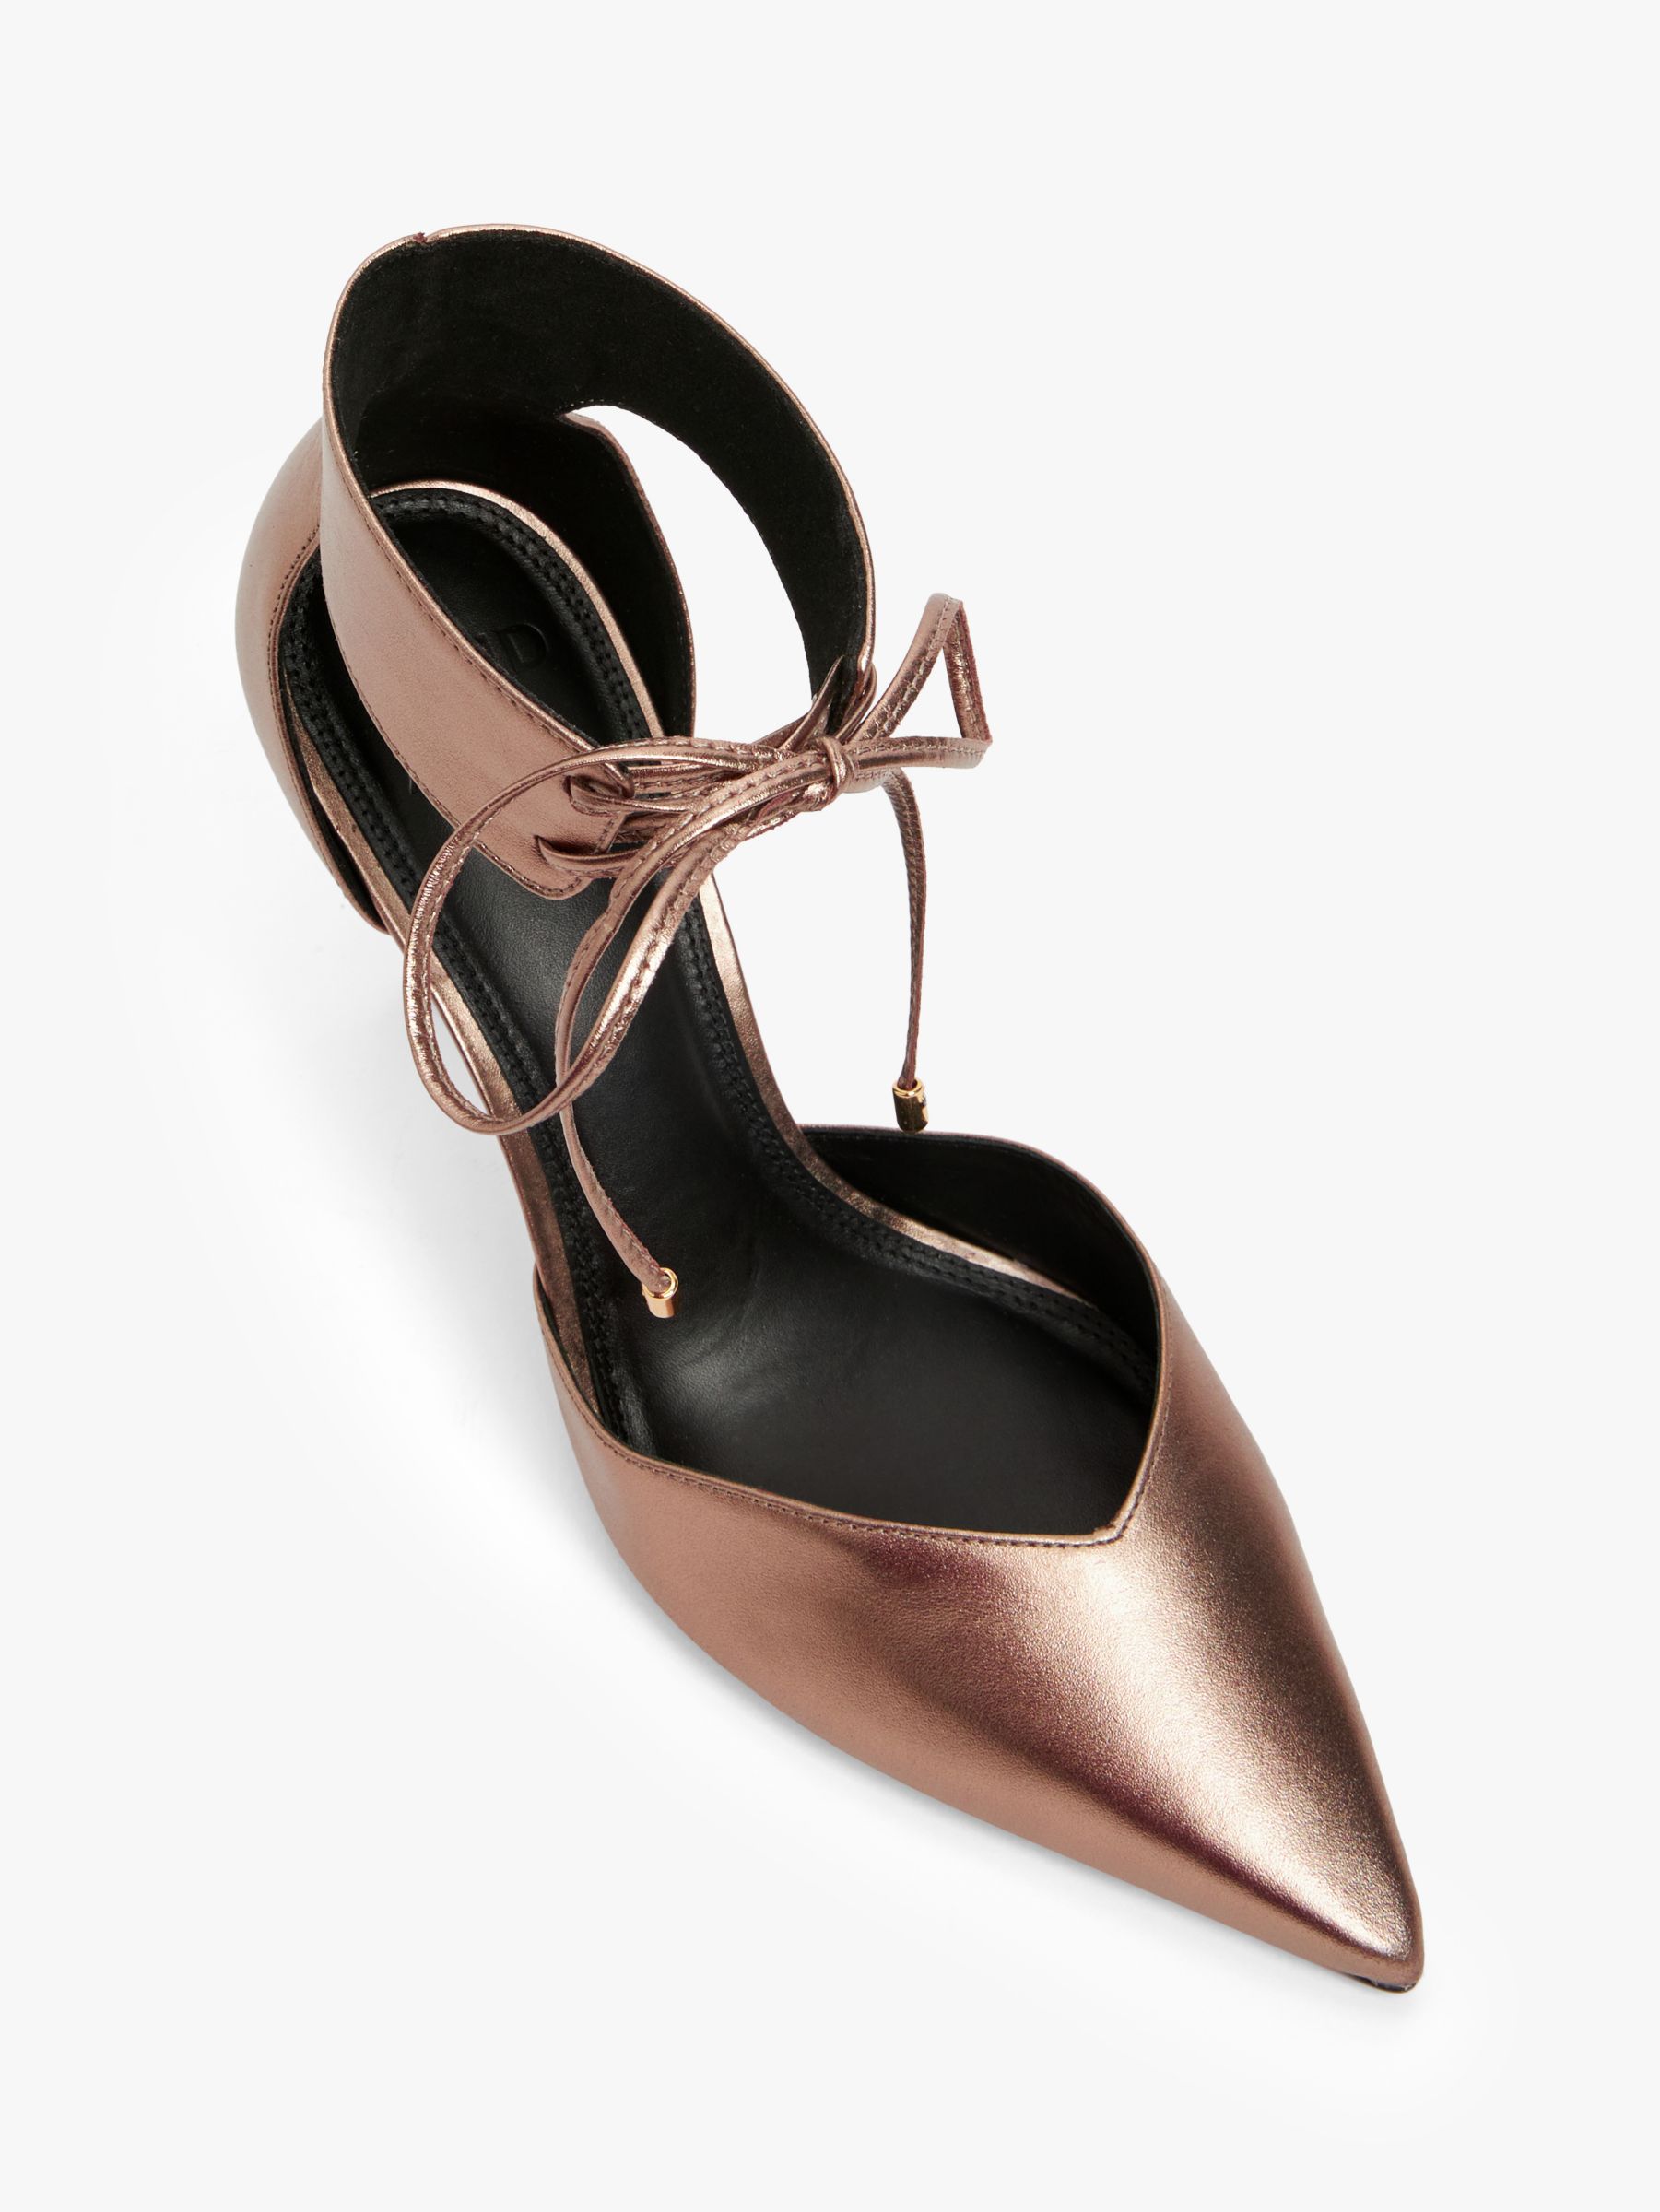 Buy AND/OR Daisy Leather Sweetheart Topline Metal Heel Open Court Shoes, Gold Online at johnlewis.com